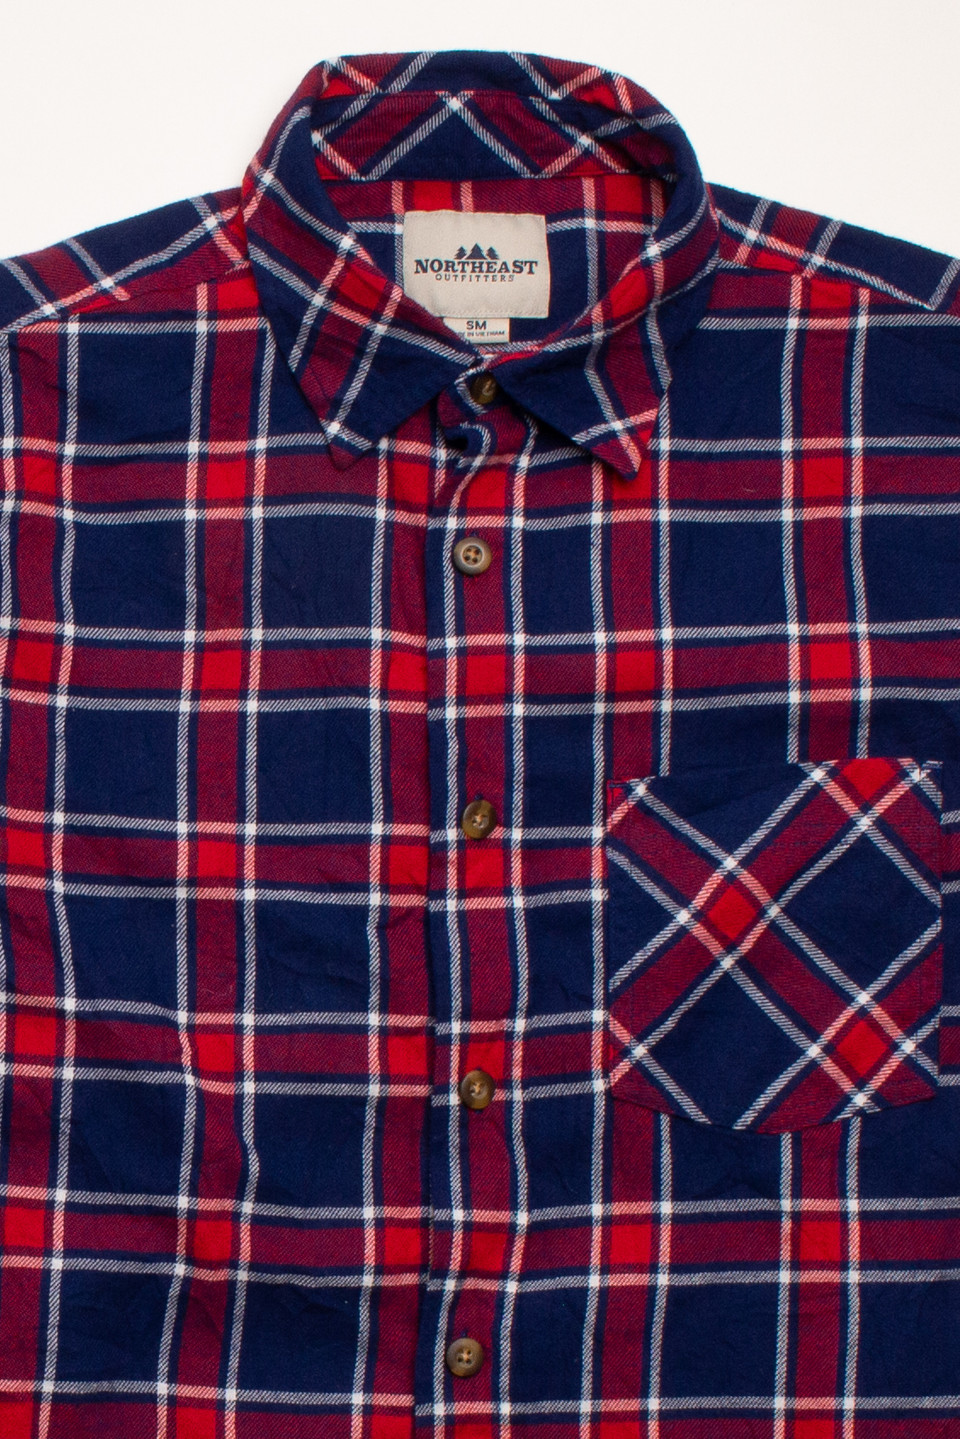 Vintage Northeast Outfitters Flannel Shirt (2000s) - Ragstock.com